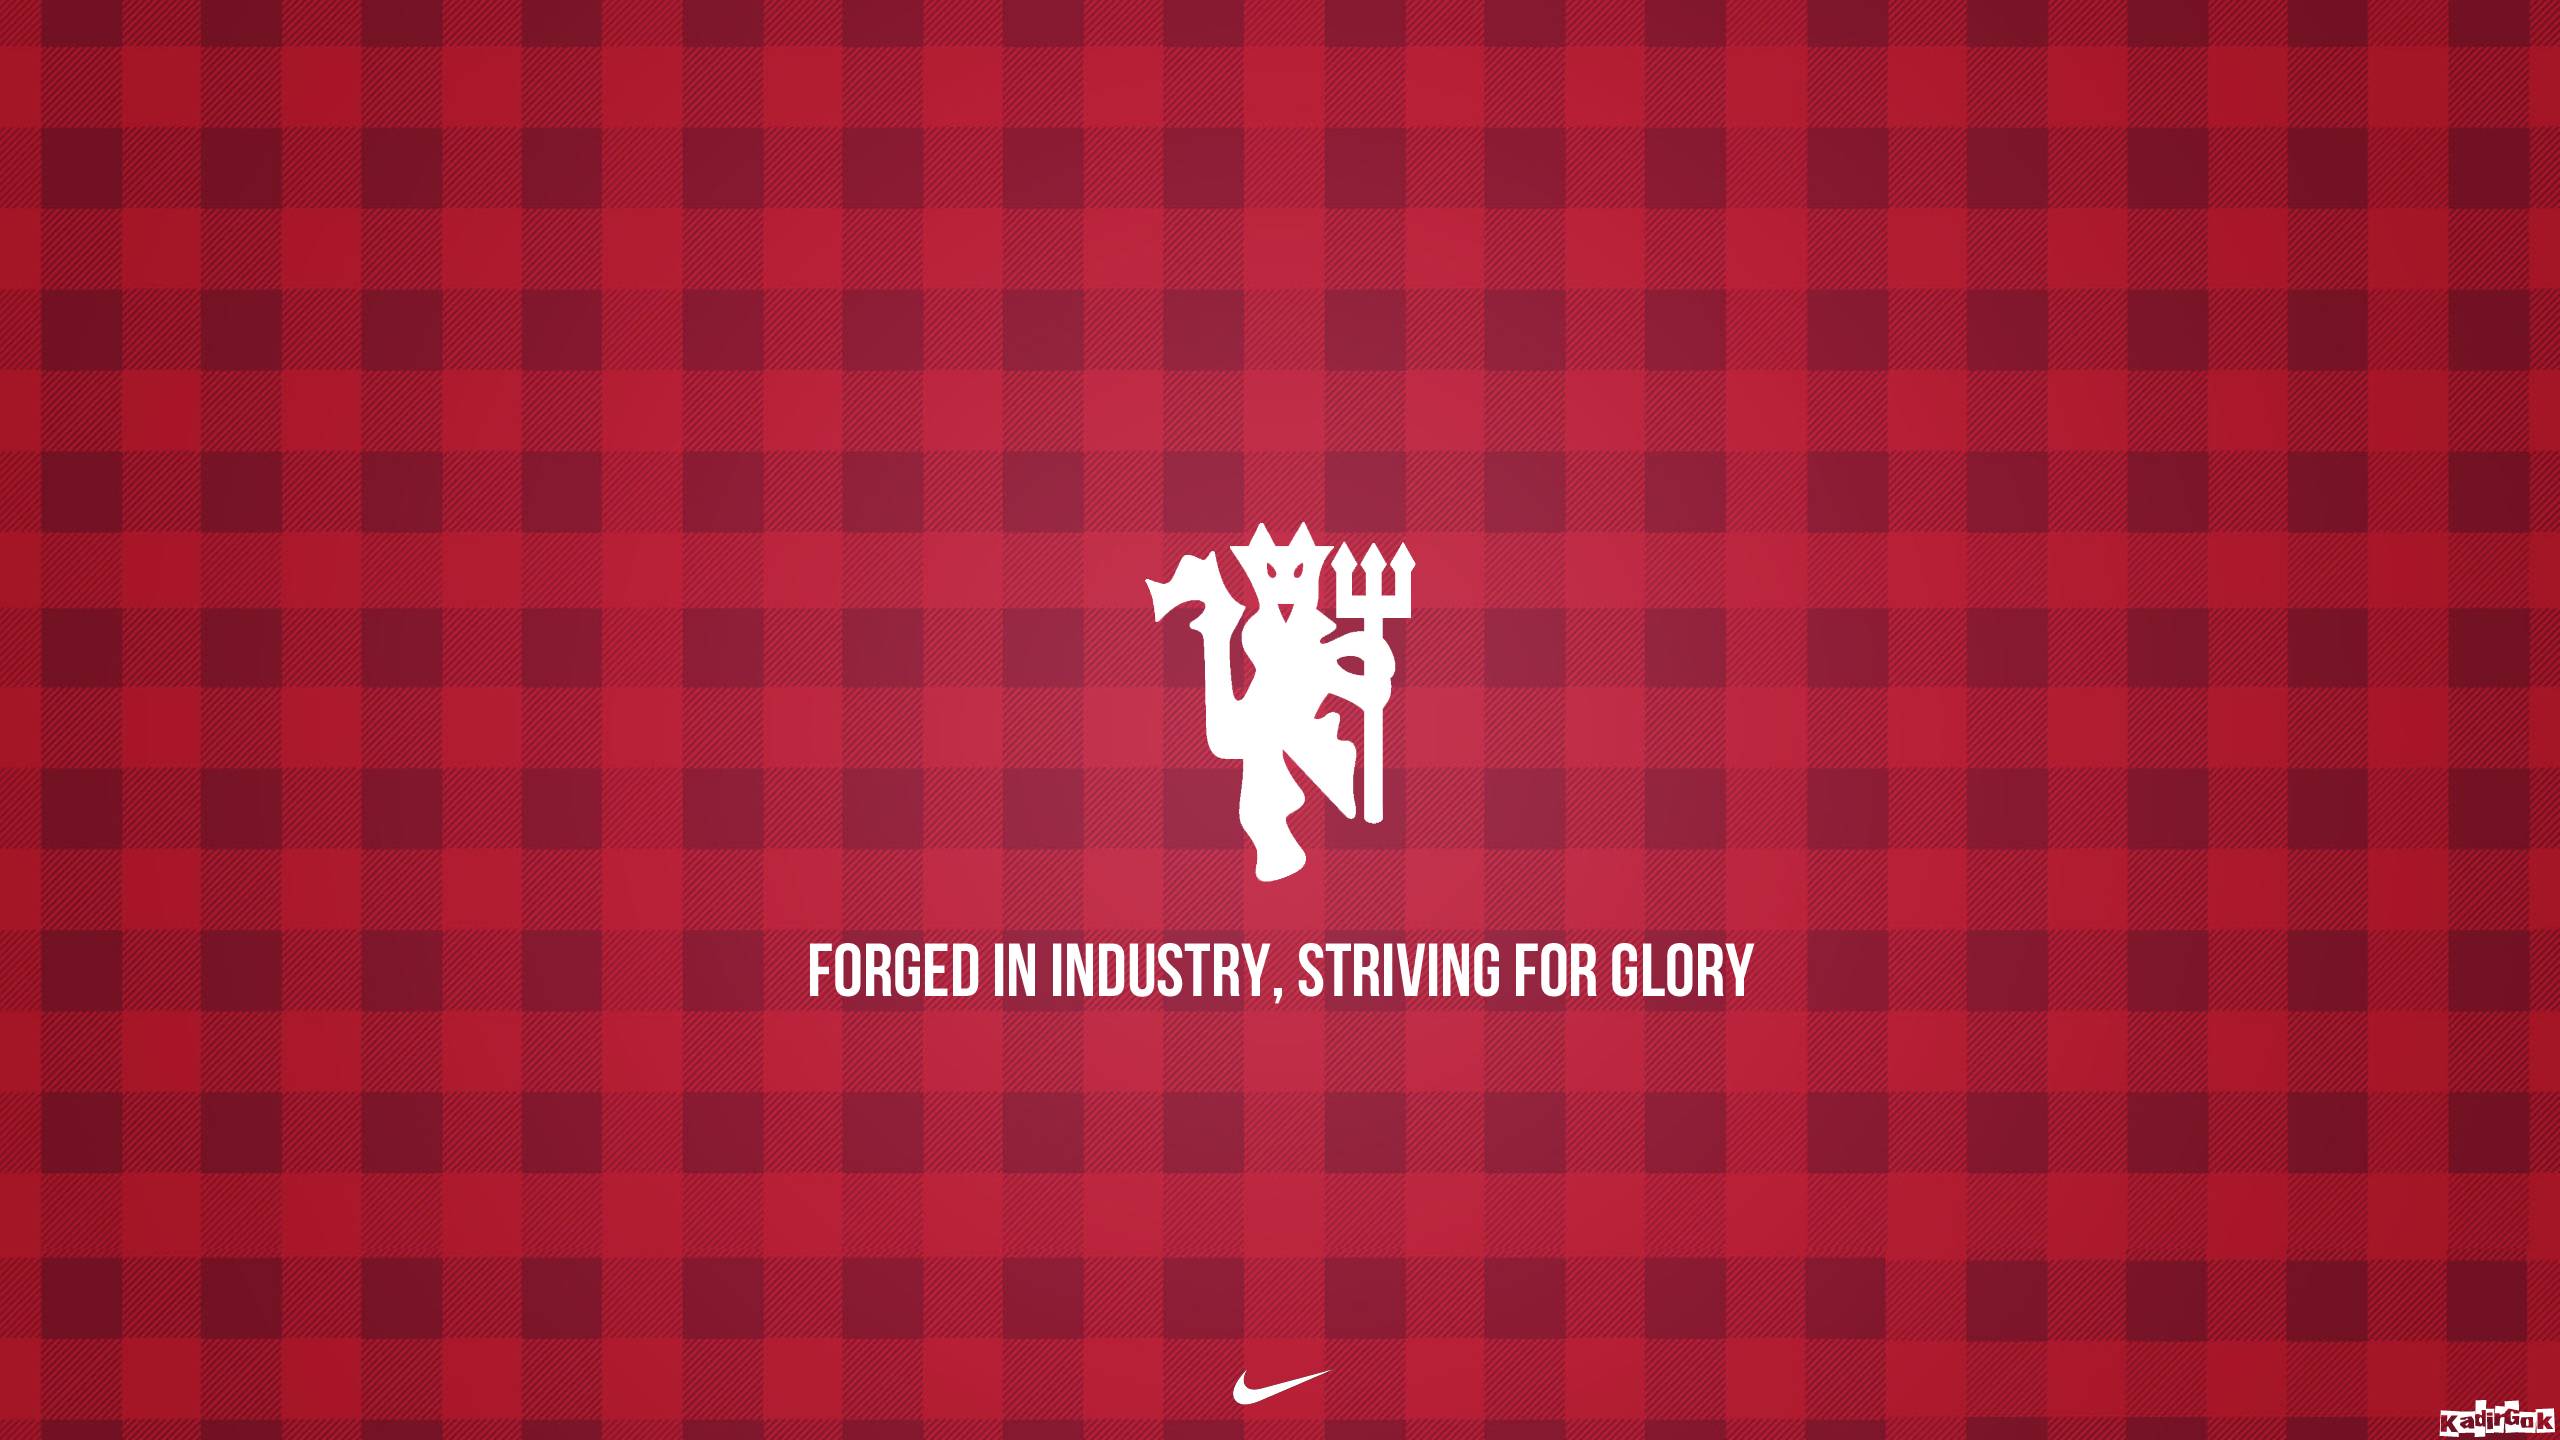 Man United Wallpapers